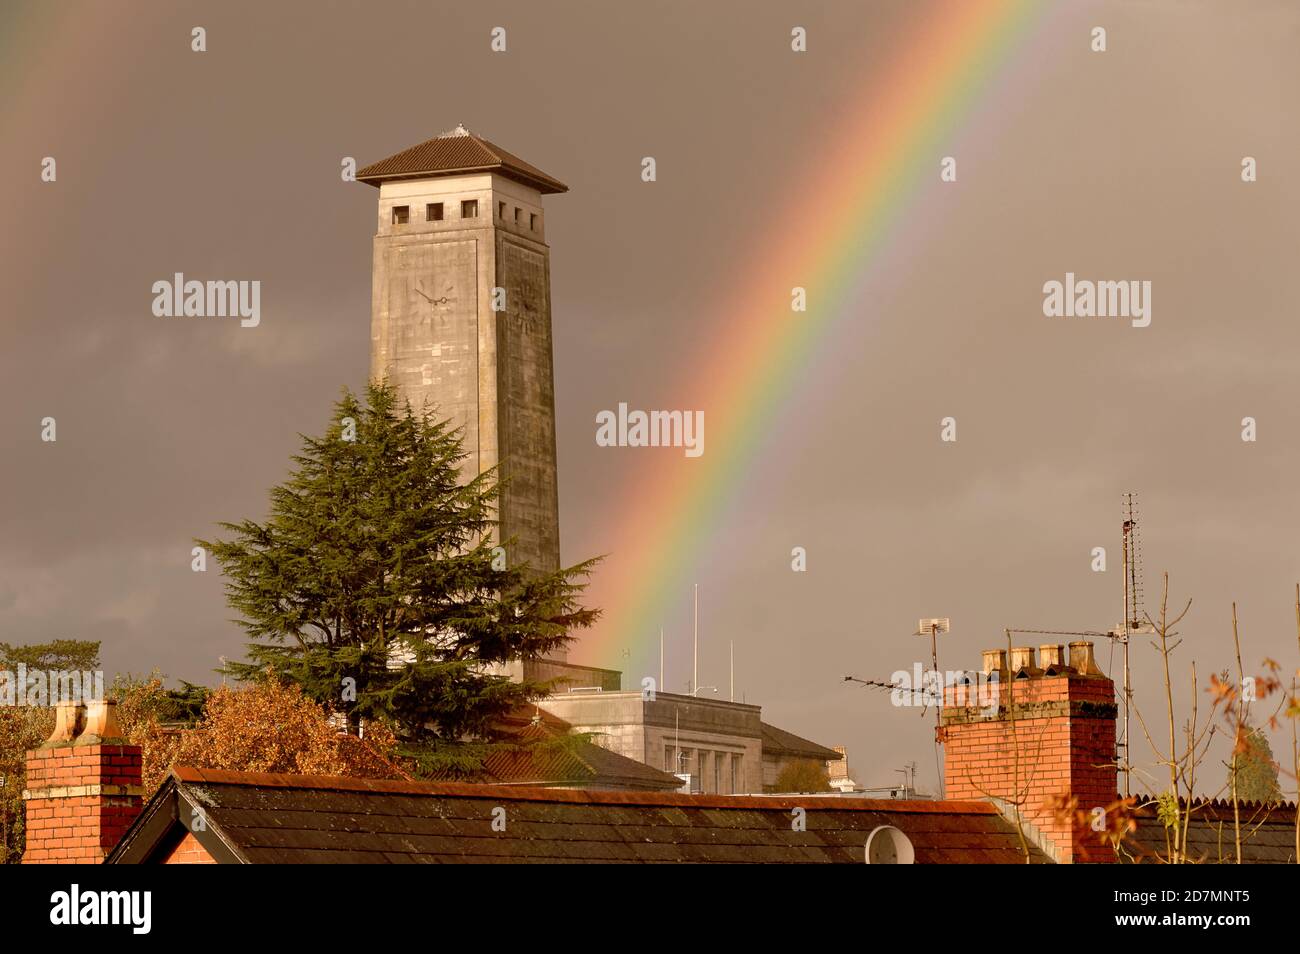 Newport Civic Centre and its landmark clock tower situated at the apparent end of a rainbow. The home of Newport City Council. Stock Photo